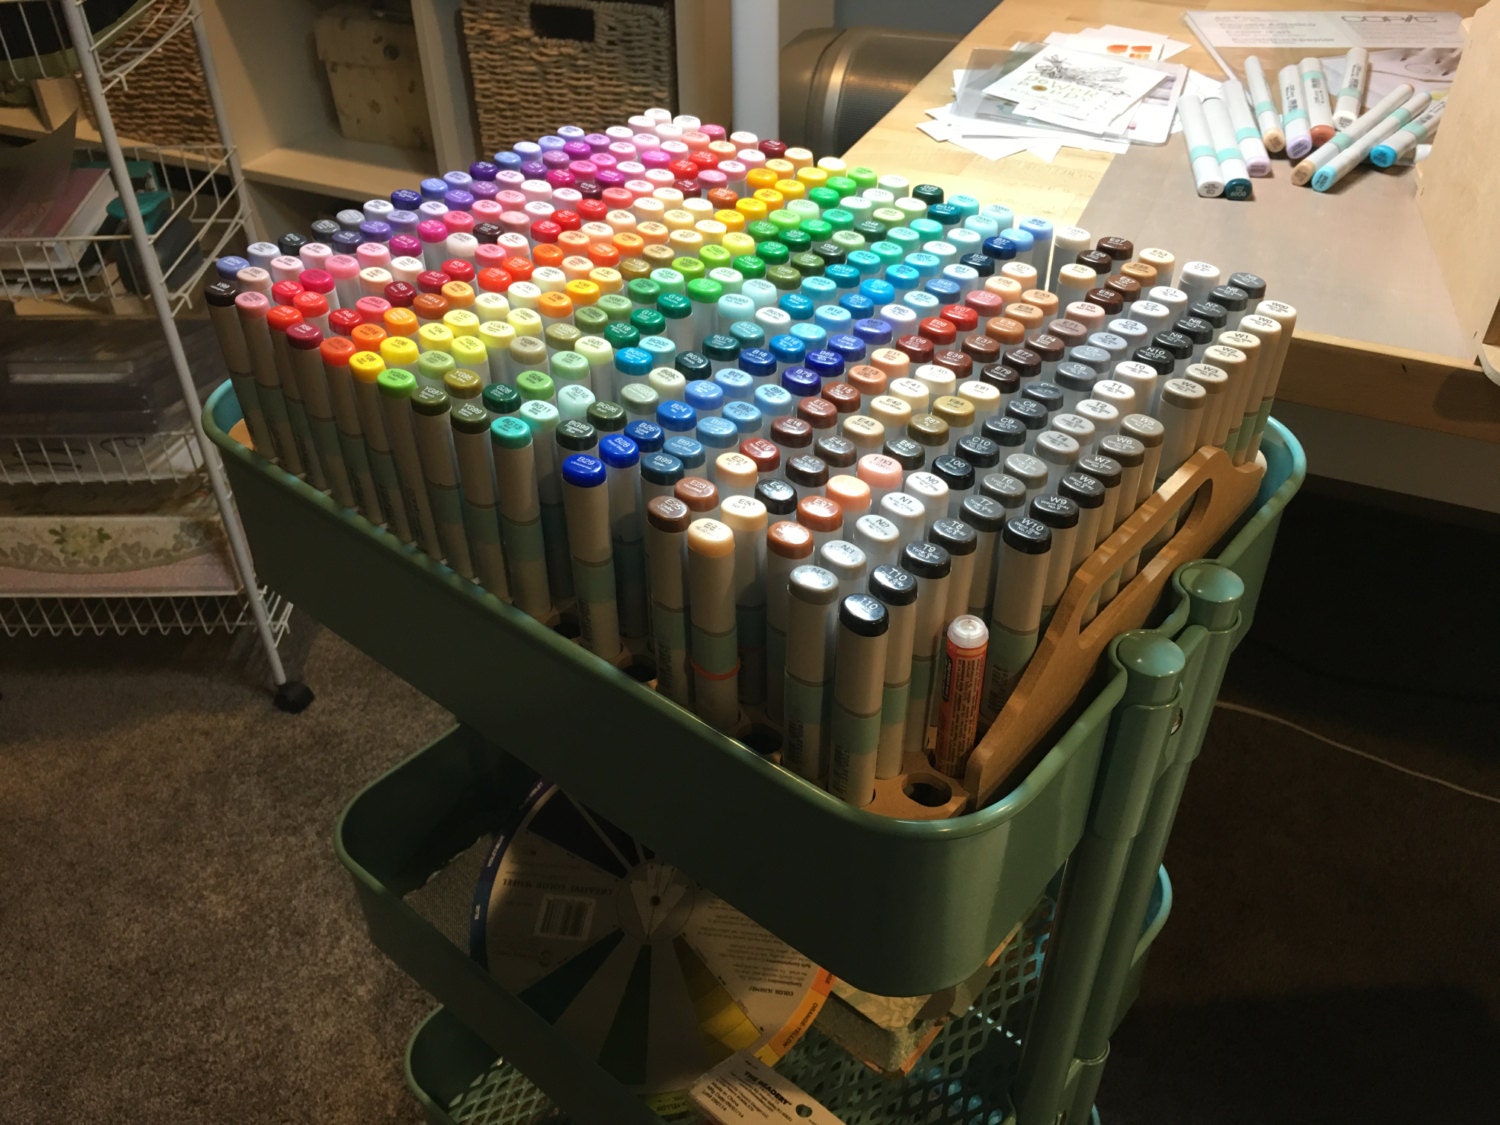 ALI'S ART MARKERS, Alcohol Markers, Dual Tip Double Ended Marker, 60  Colours, Clear Plastic Storage Case, Drawing, Sketching